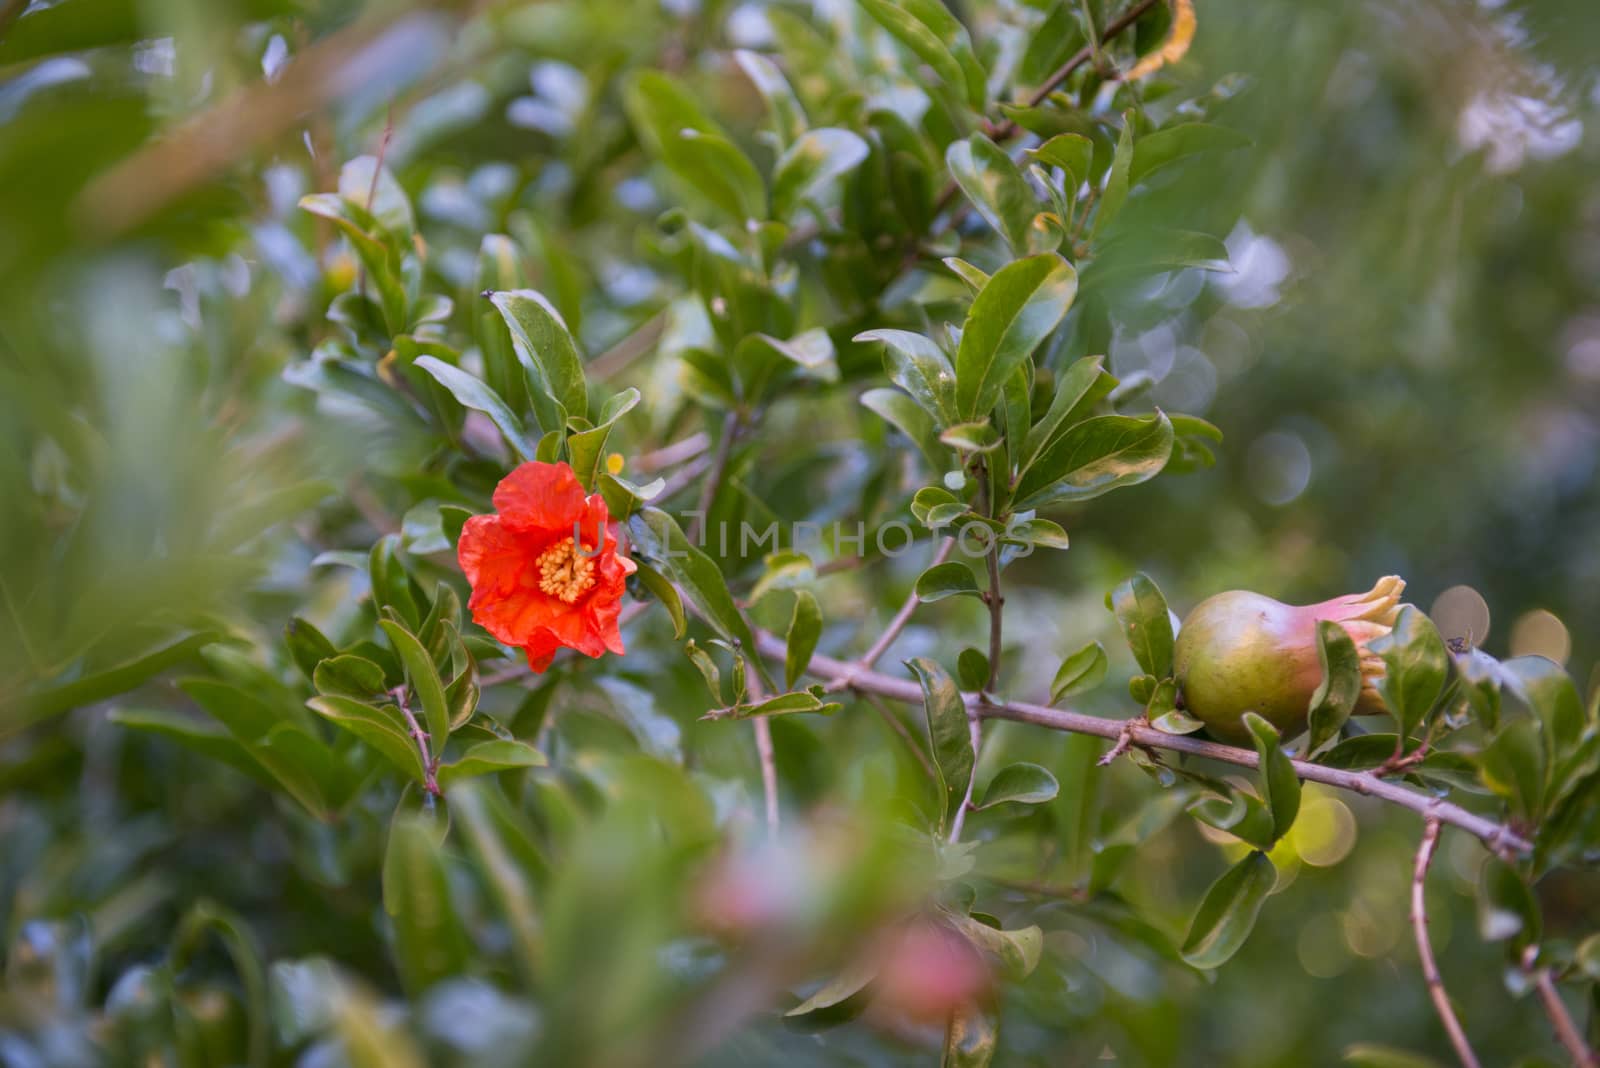 Pomegranate (Punica granatum) tree with fruit and flower blossom